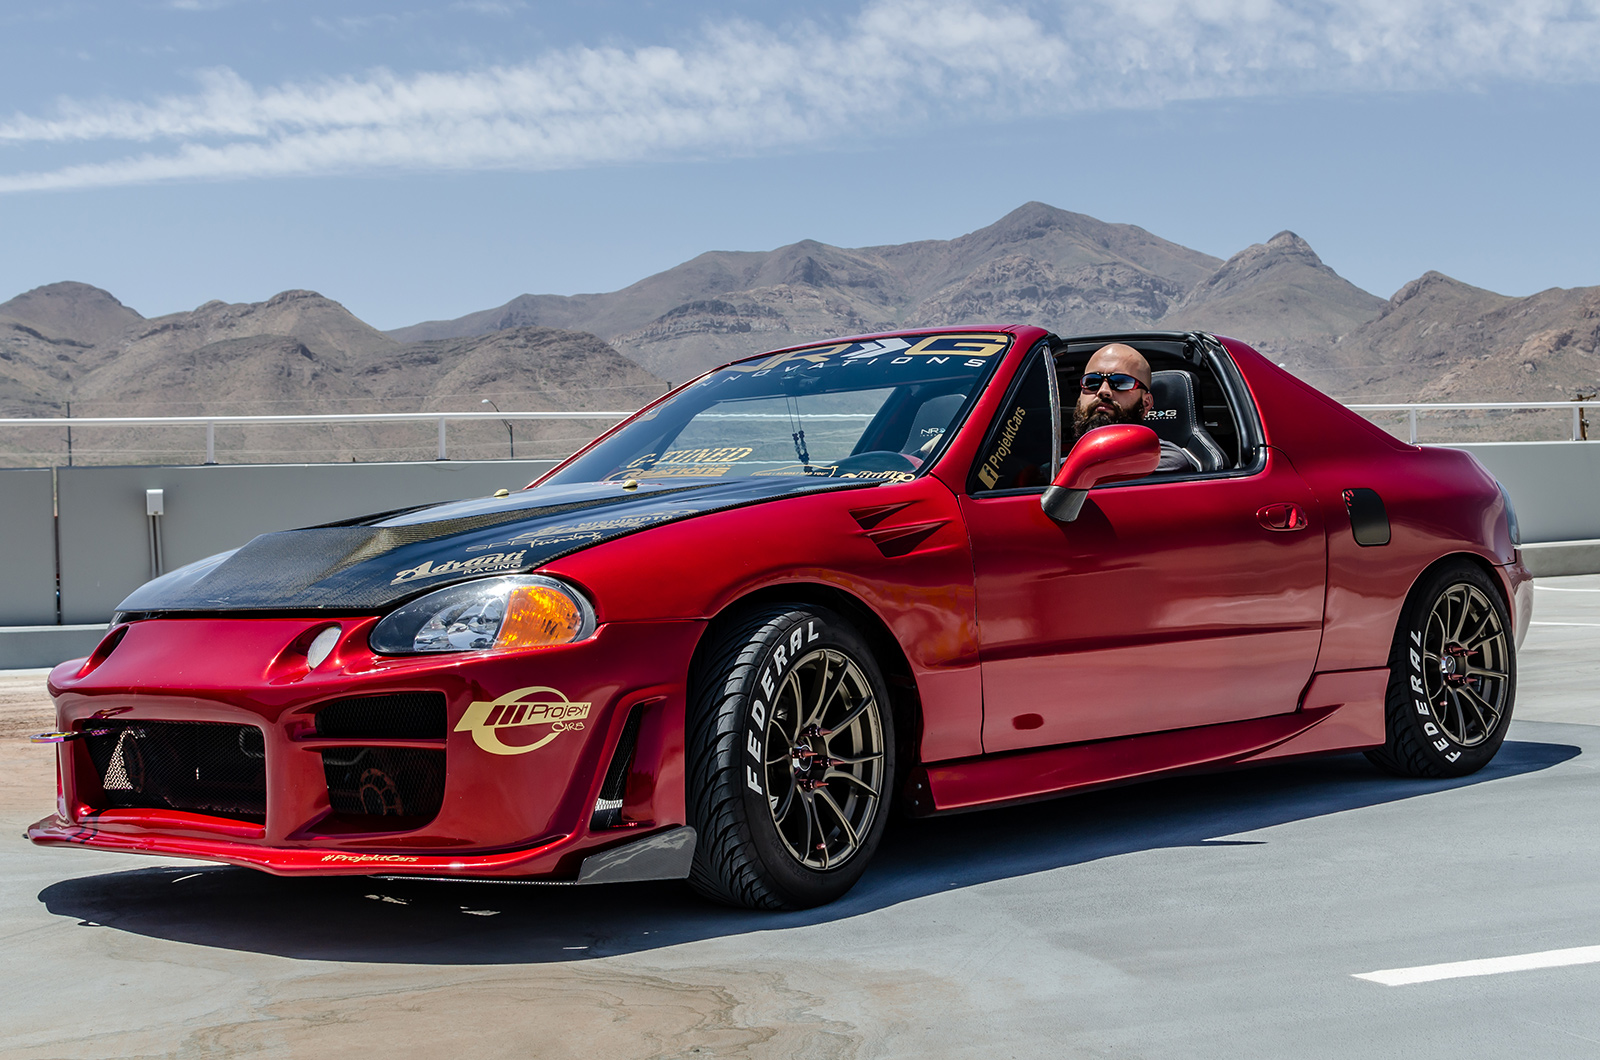 Stay The Course Dustin Urdaneta S 1993 Honda Del Sol Si Pasmag Is The Tuner S Source For Modified Car Culture Since 1999